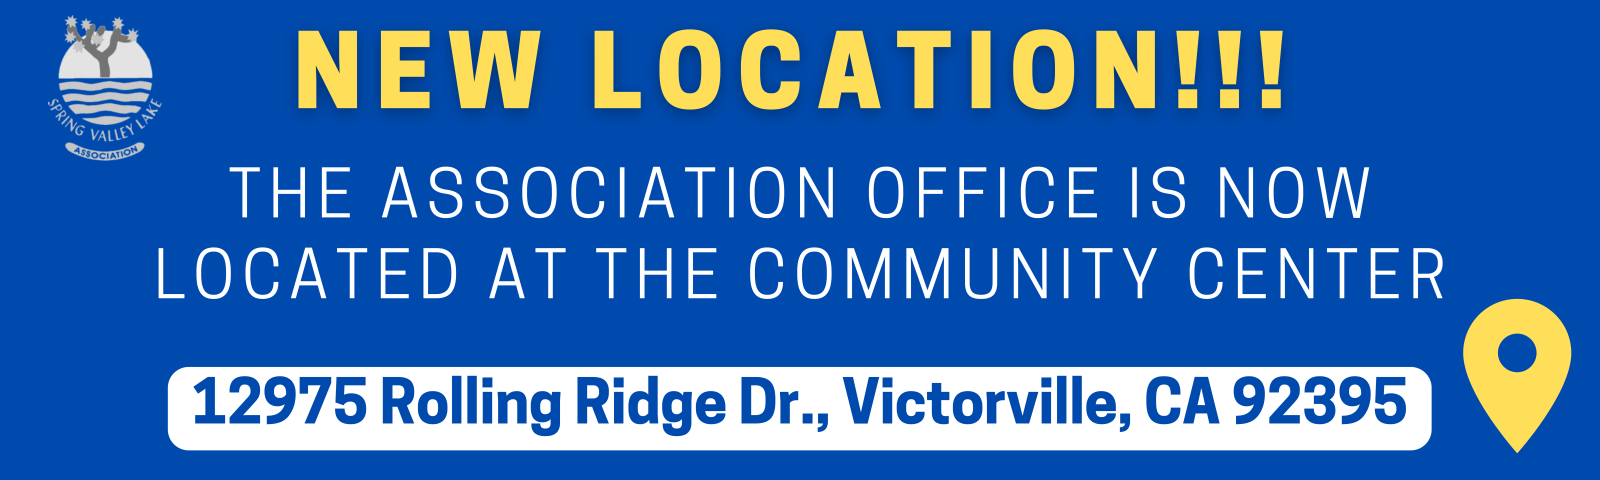 Association Office has temporarily moved to 12975 Rolling Ridge Dr., Victorville, CA 92395